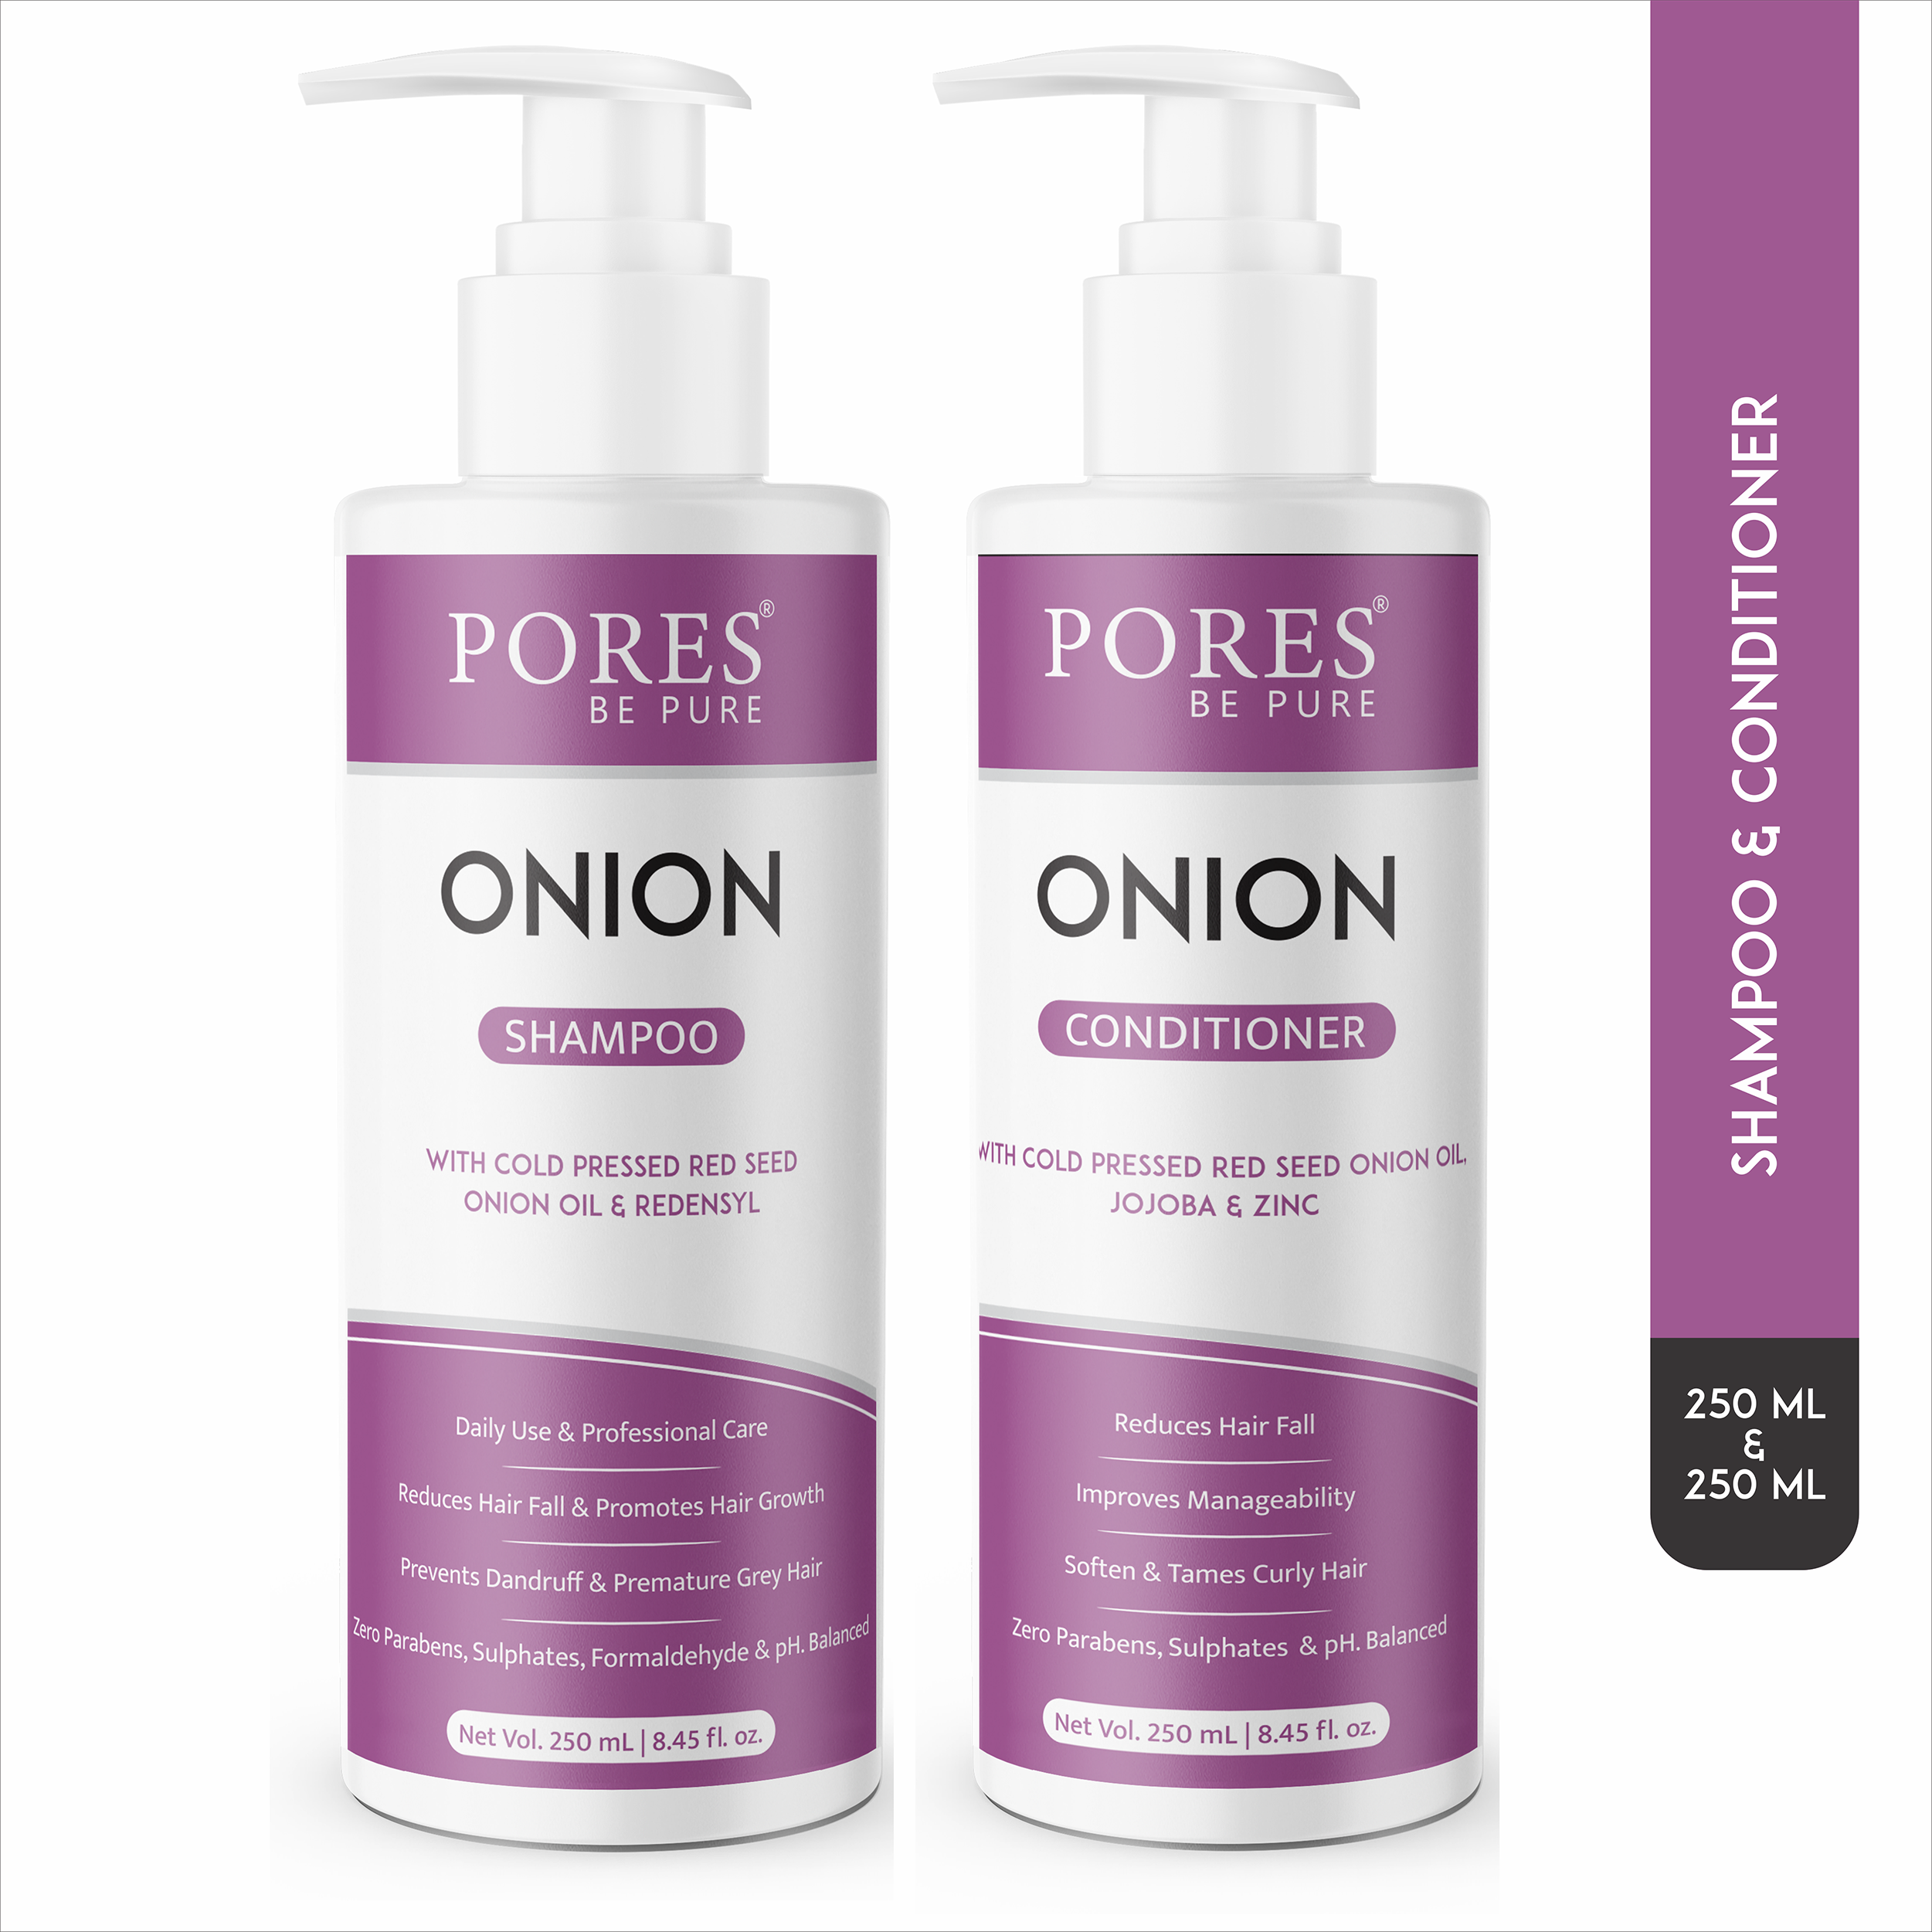 Onion Shampoo and Conditioner by PORES BE PURE